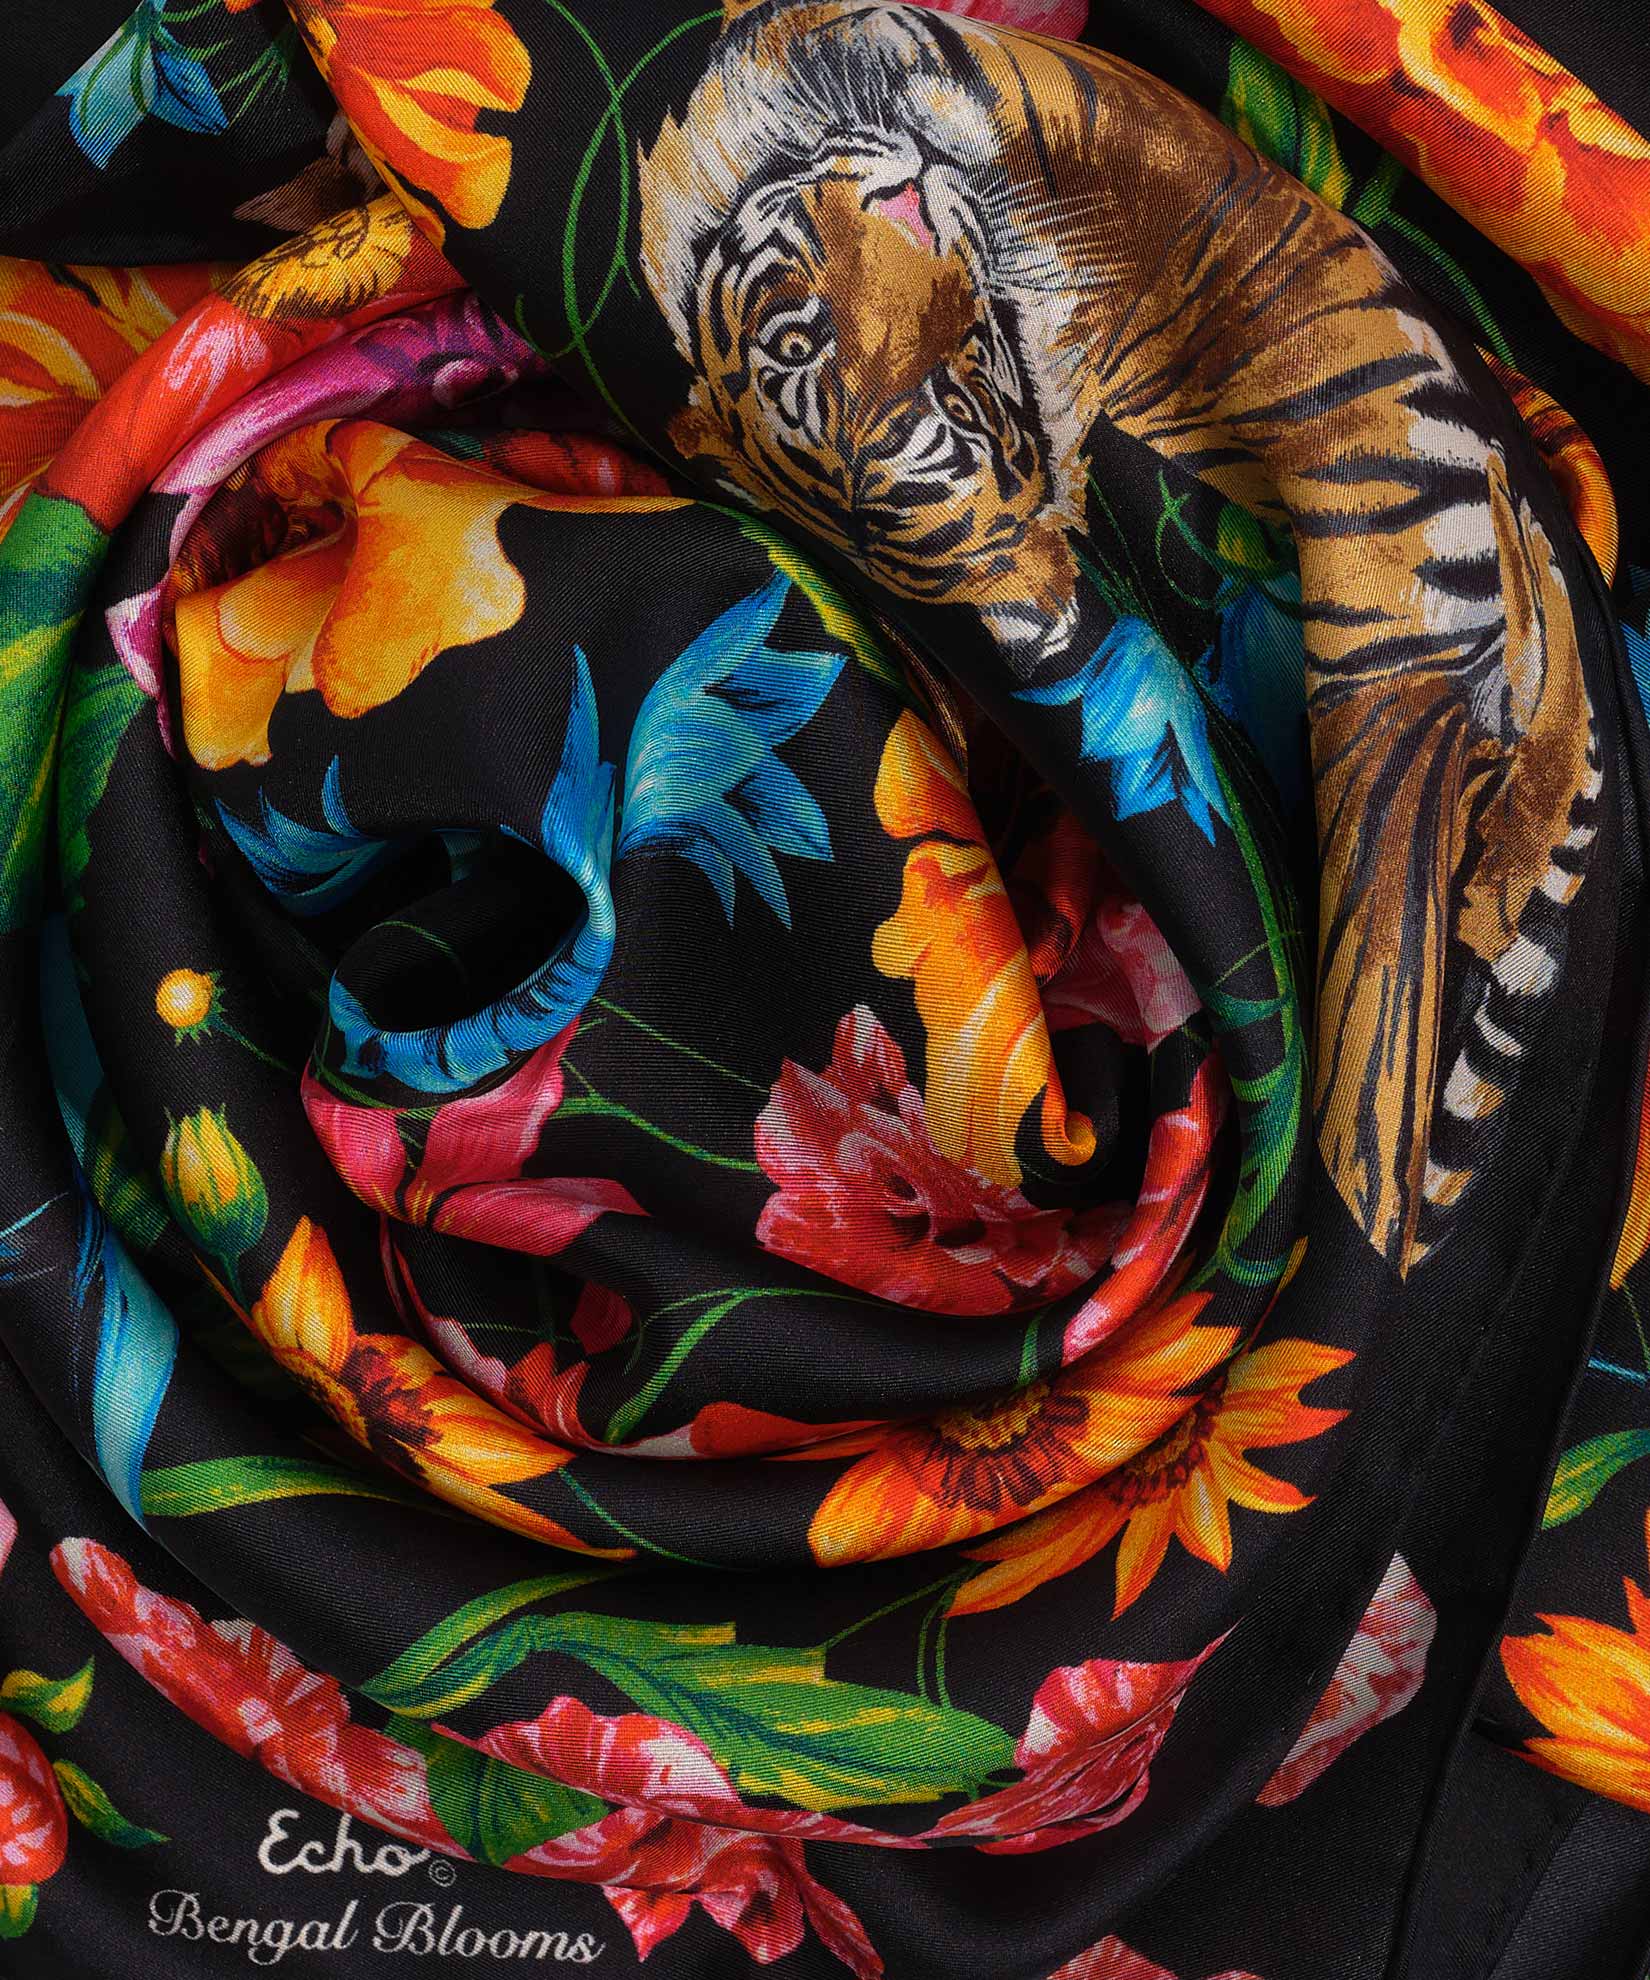 Louis Vuitton Multi-colored Cities Printed Silk Scarf